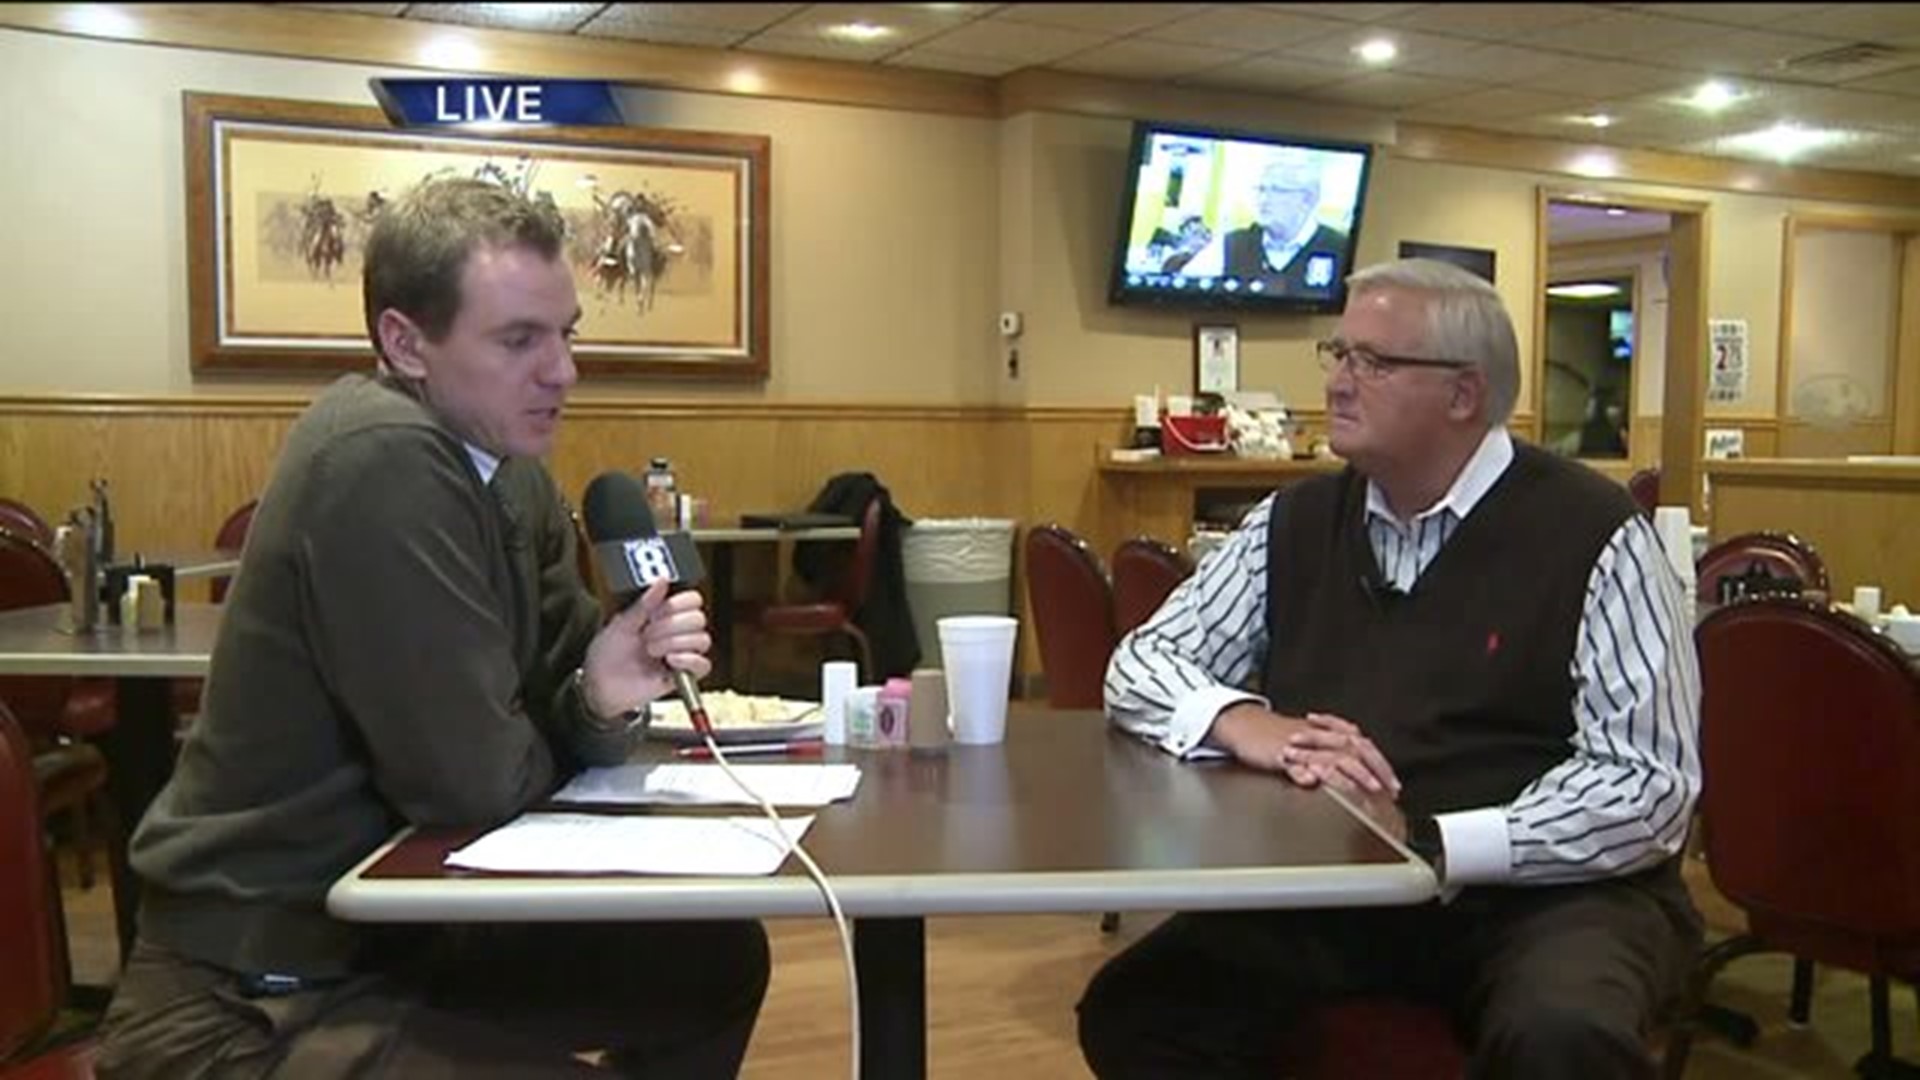 Breakfast With: Part 1 with Mayor Dennis Pauley